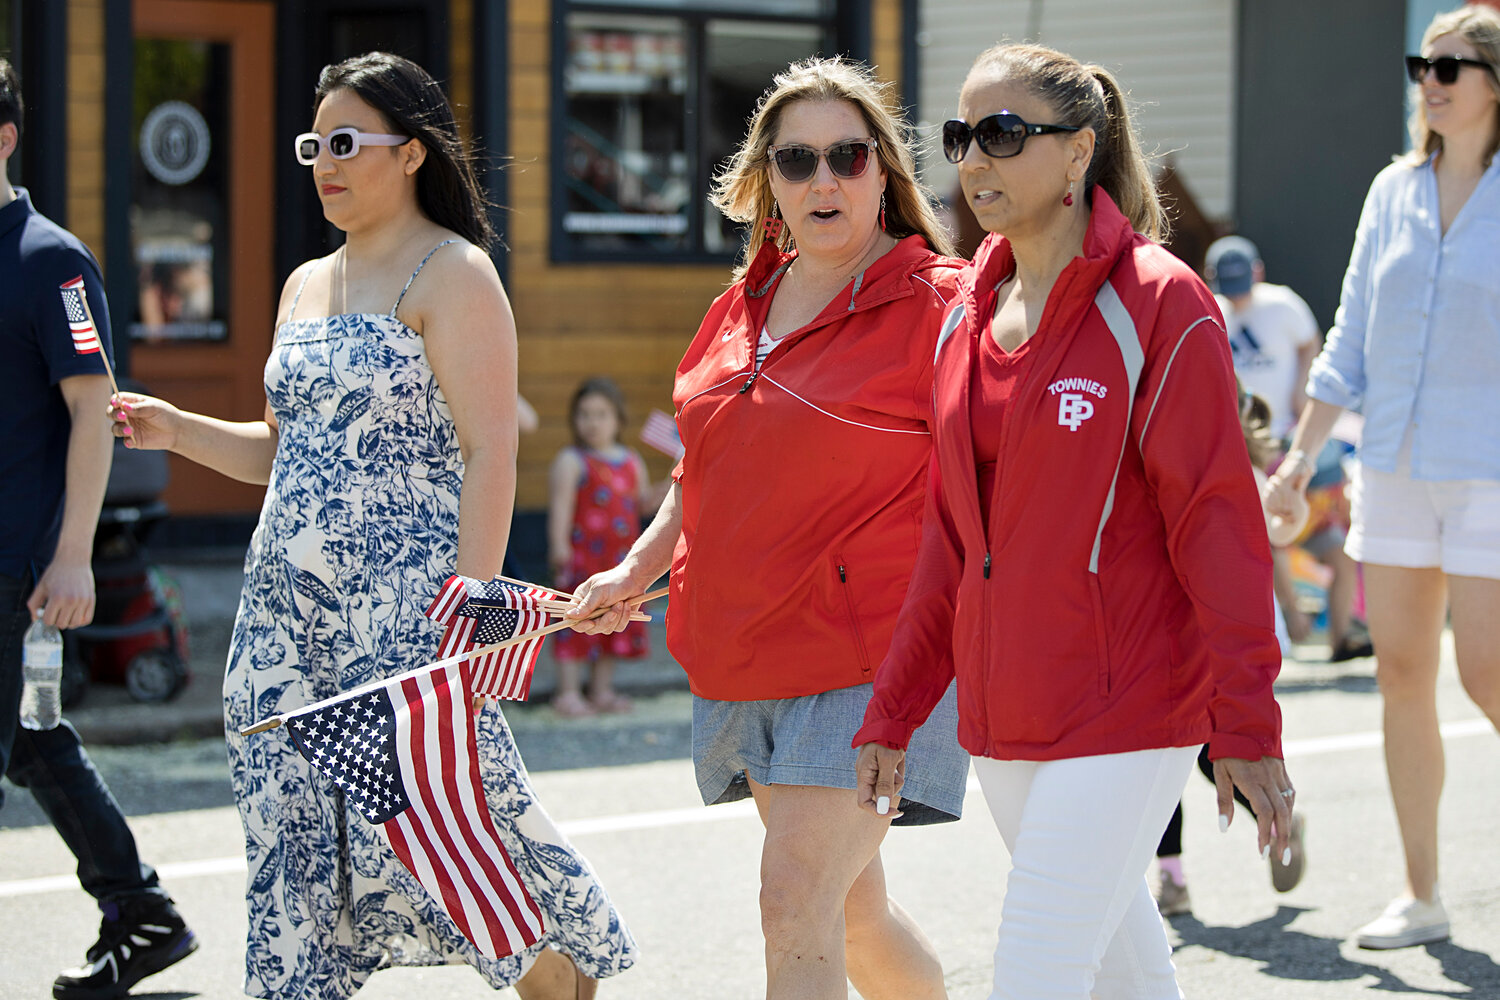 Superintendent of School Sandy Forand (right) walks the parade with members of the administration.